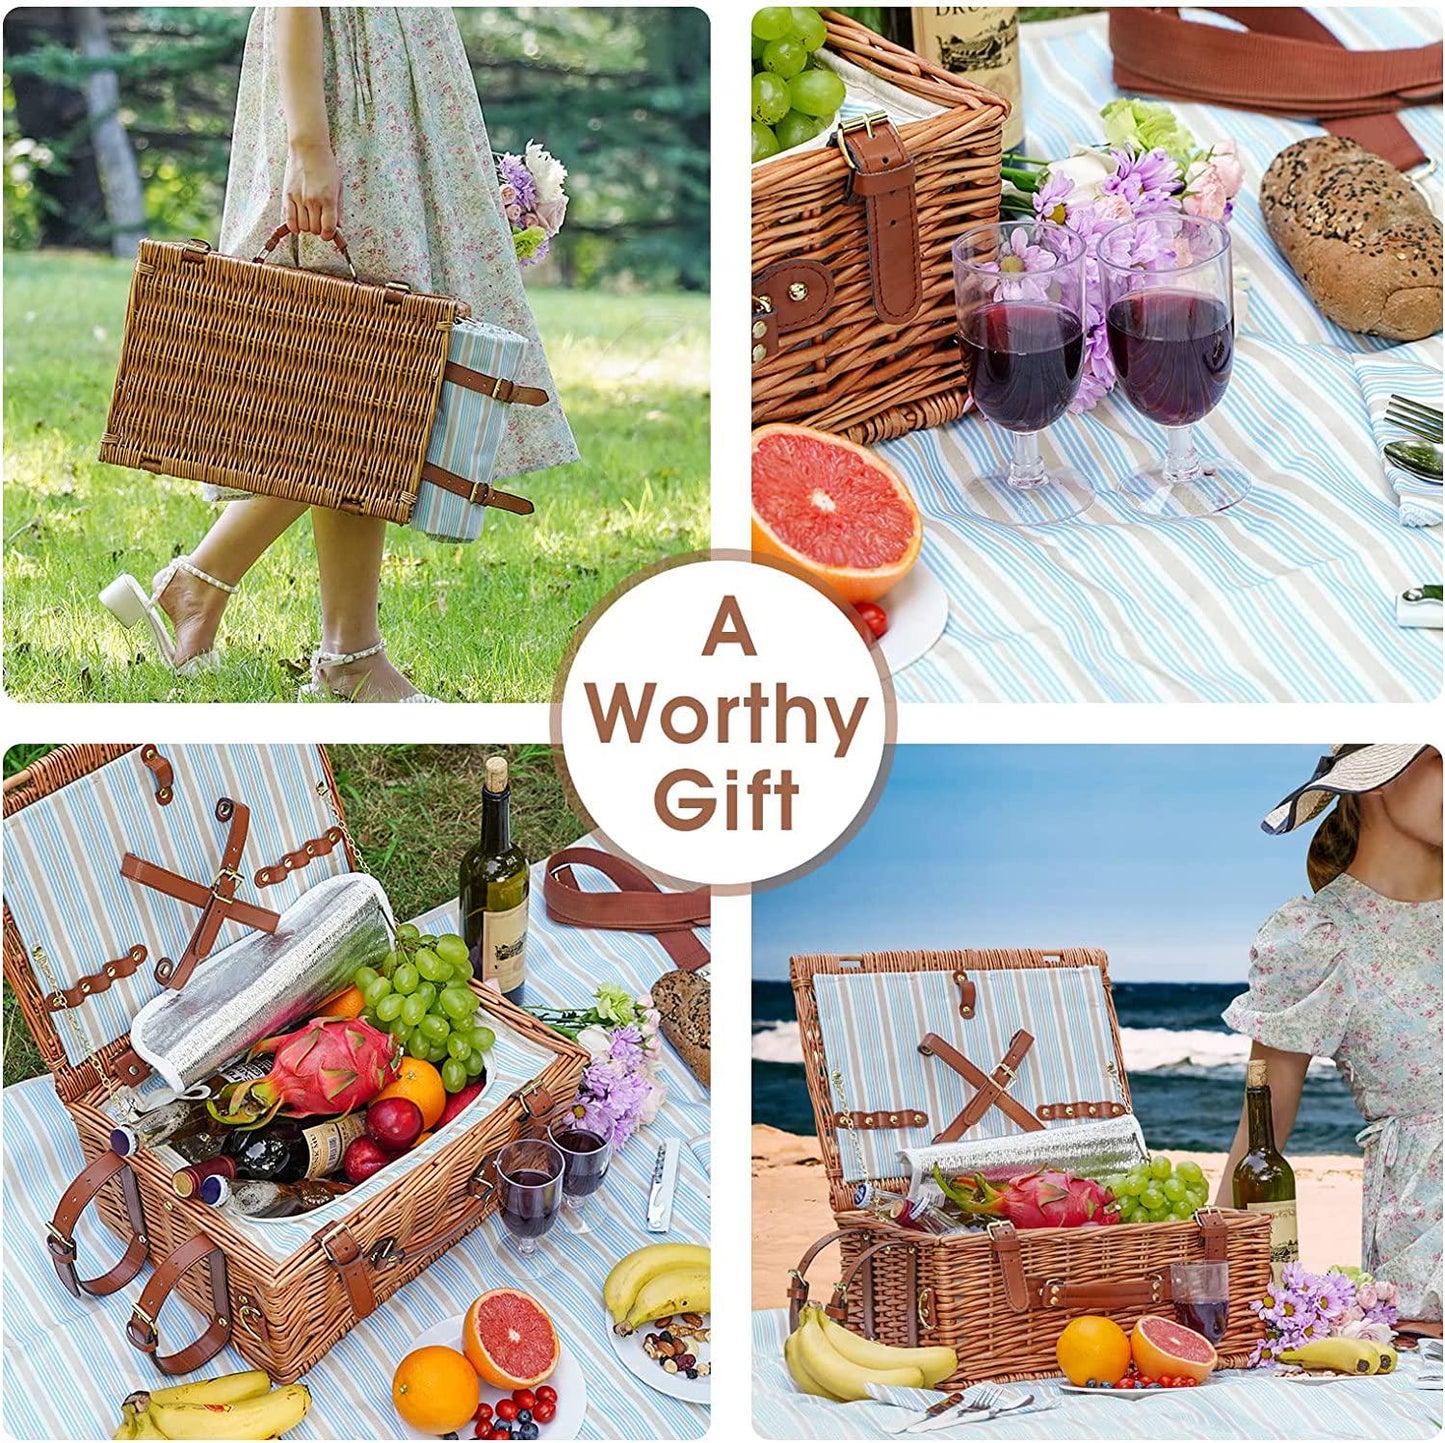 Picnic Cooler Basket Set for 2 Persons with Large Waterproof Picnic Blanket, Cutlery Service Kit and Adjustable Strap